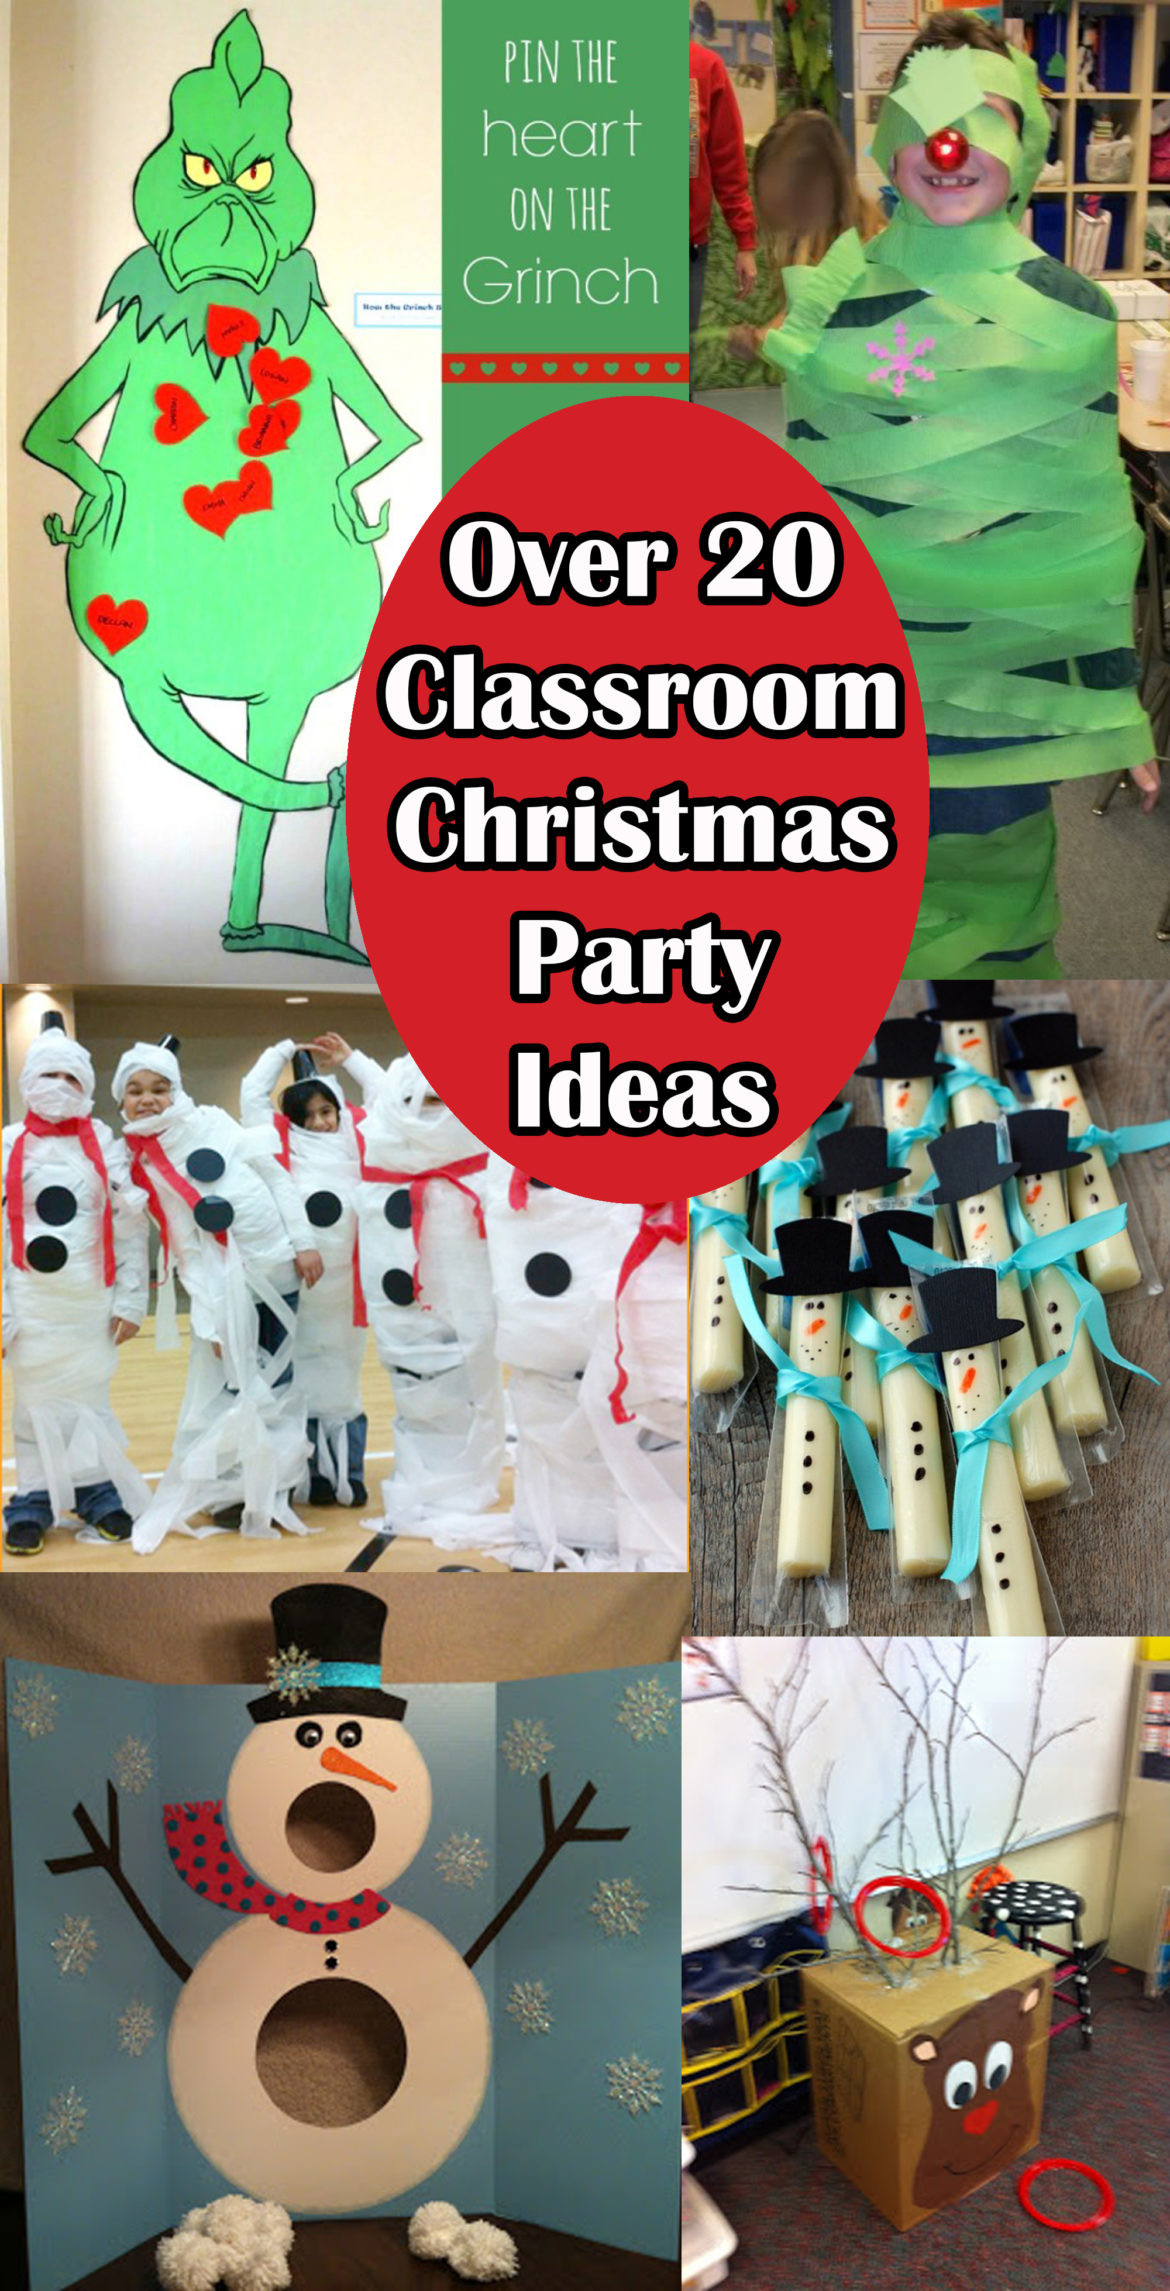 Christmas Classroom Party Ideas
 Classroom Christmas Party Ideas The Keeper of the Cheerios